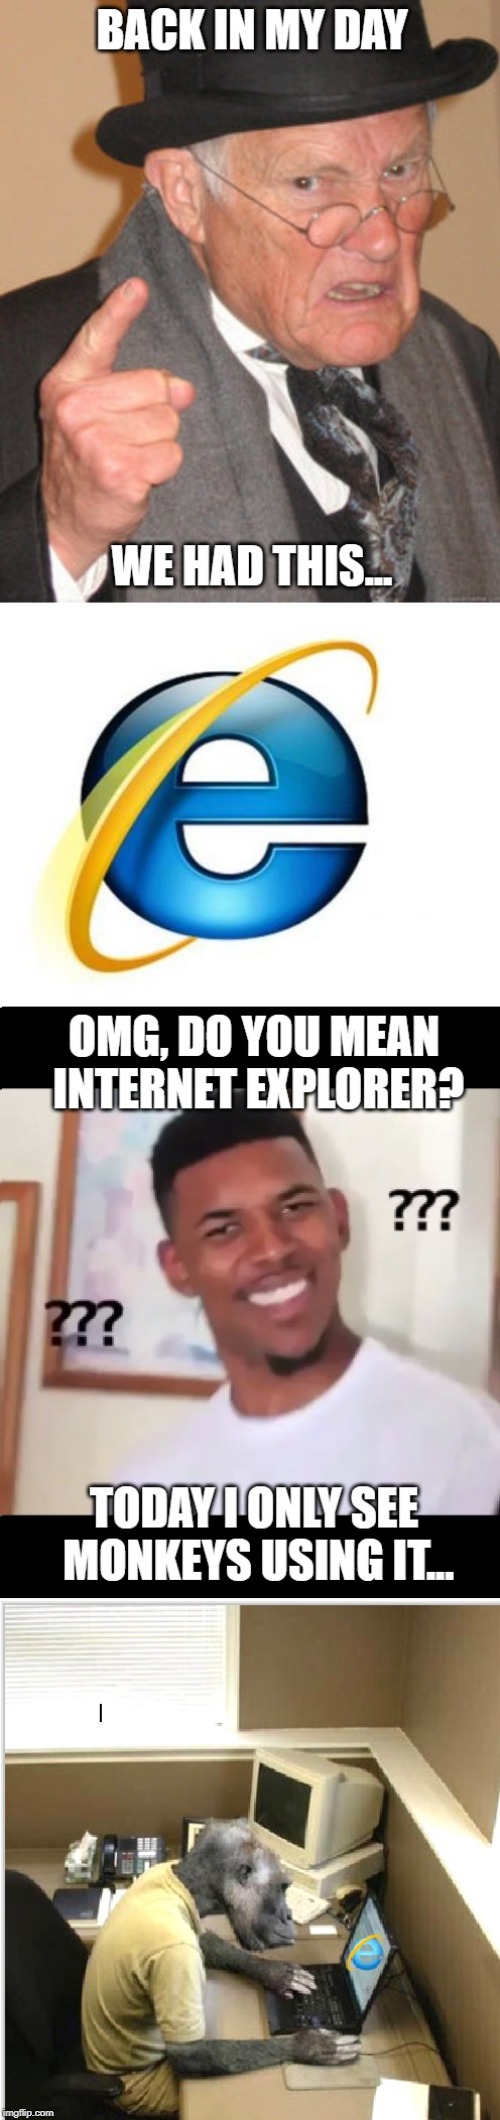 Who uses internet explorer till this day?! | image tagged in back in my day,internet explorer,omg,wait what,monkeys,internet guide | made w/ Imgflip meme maker